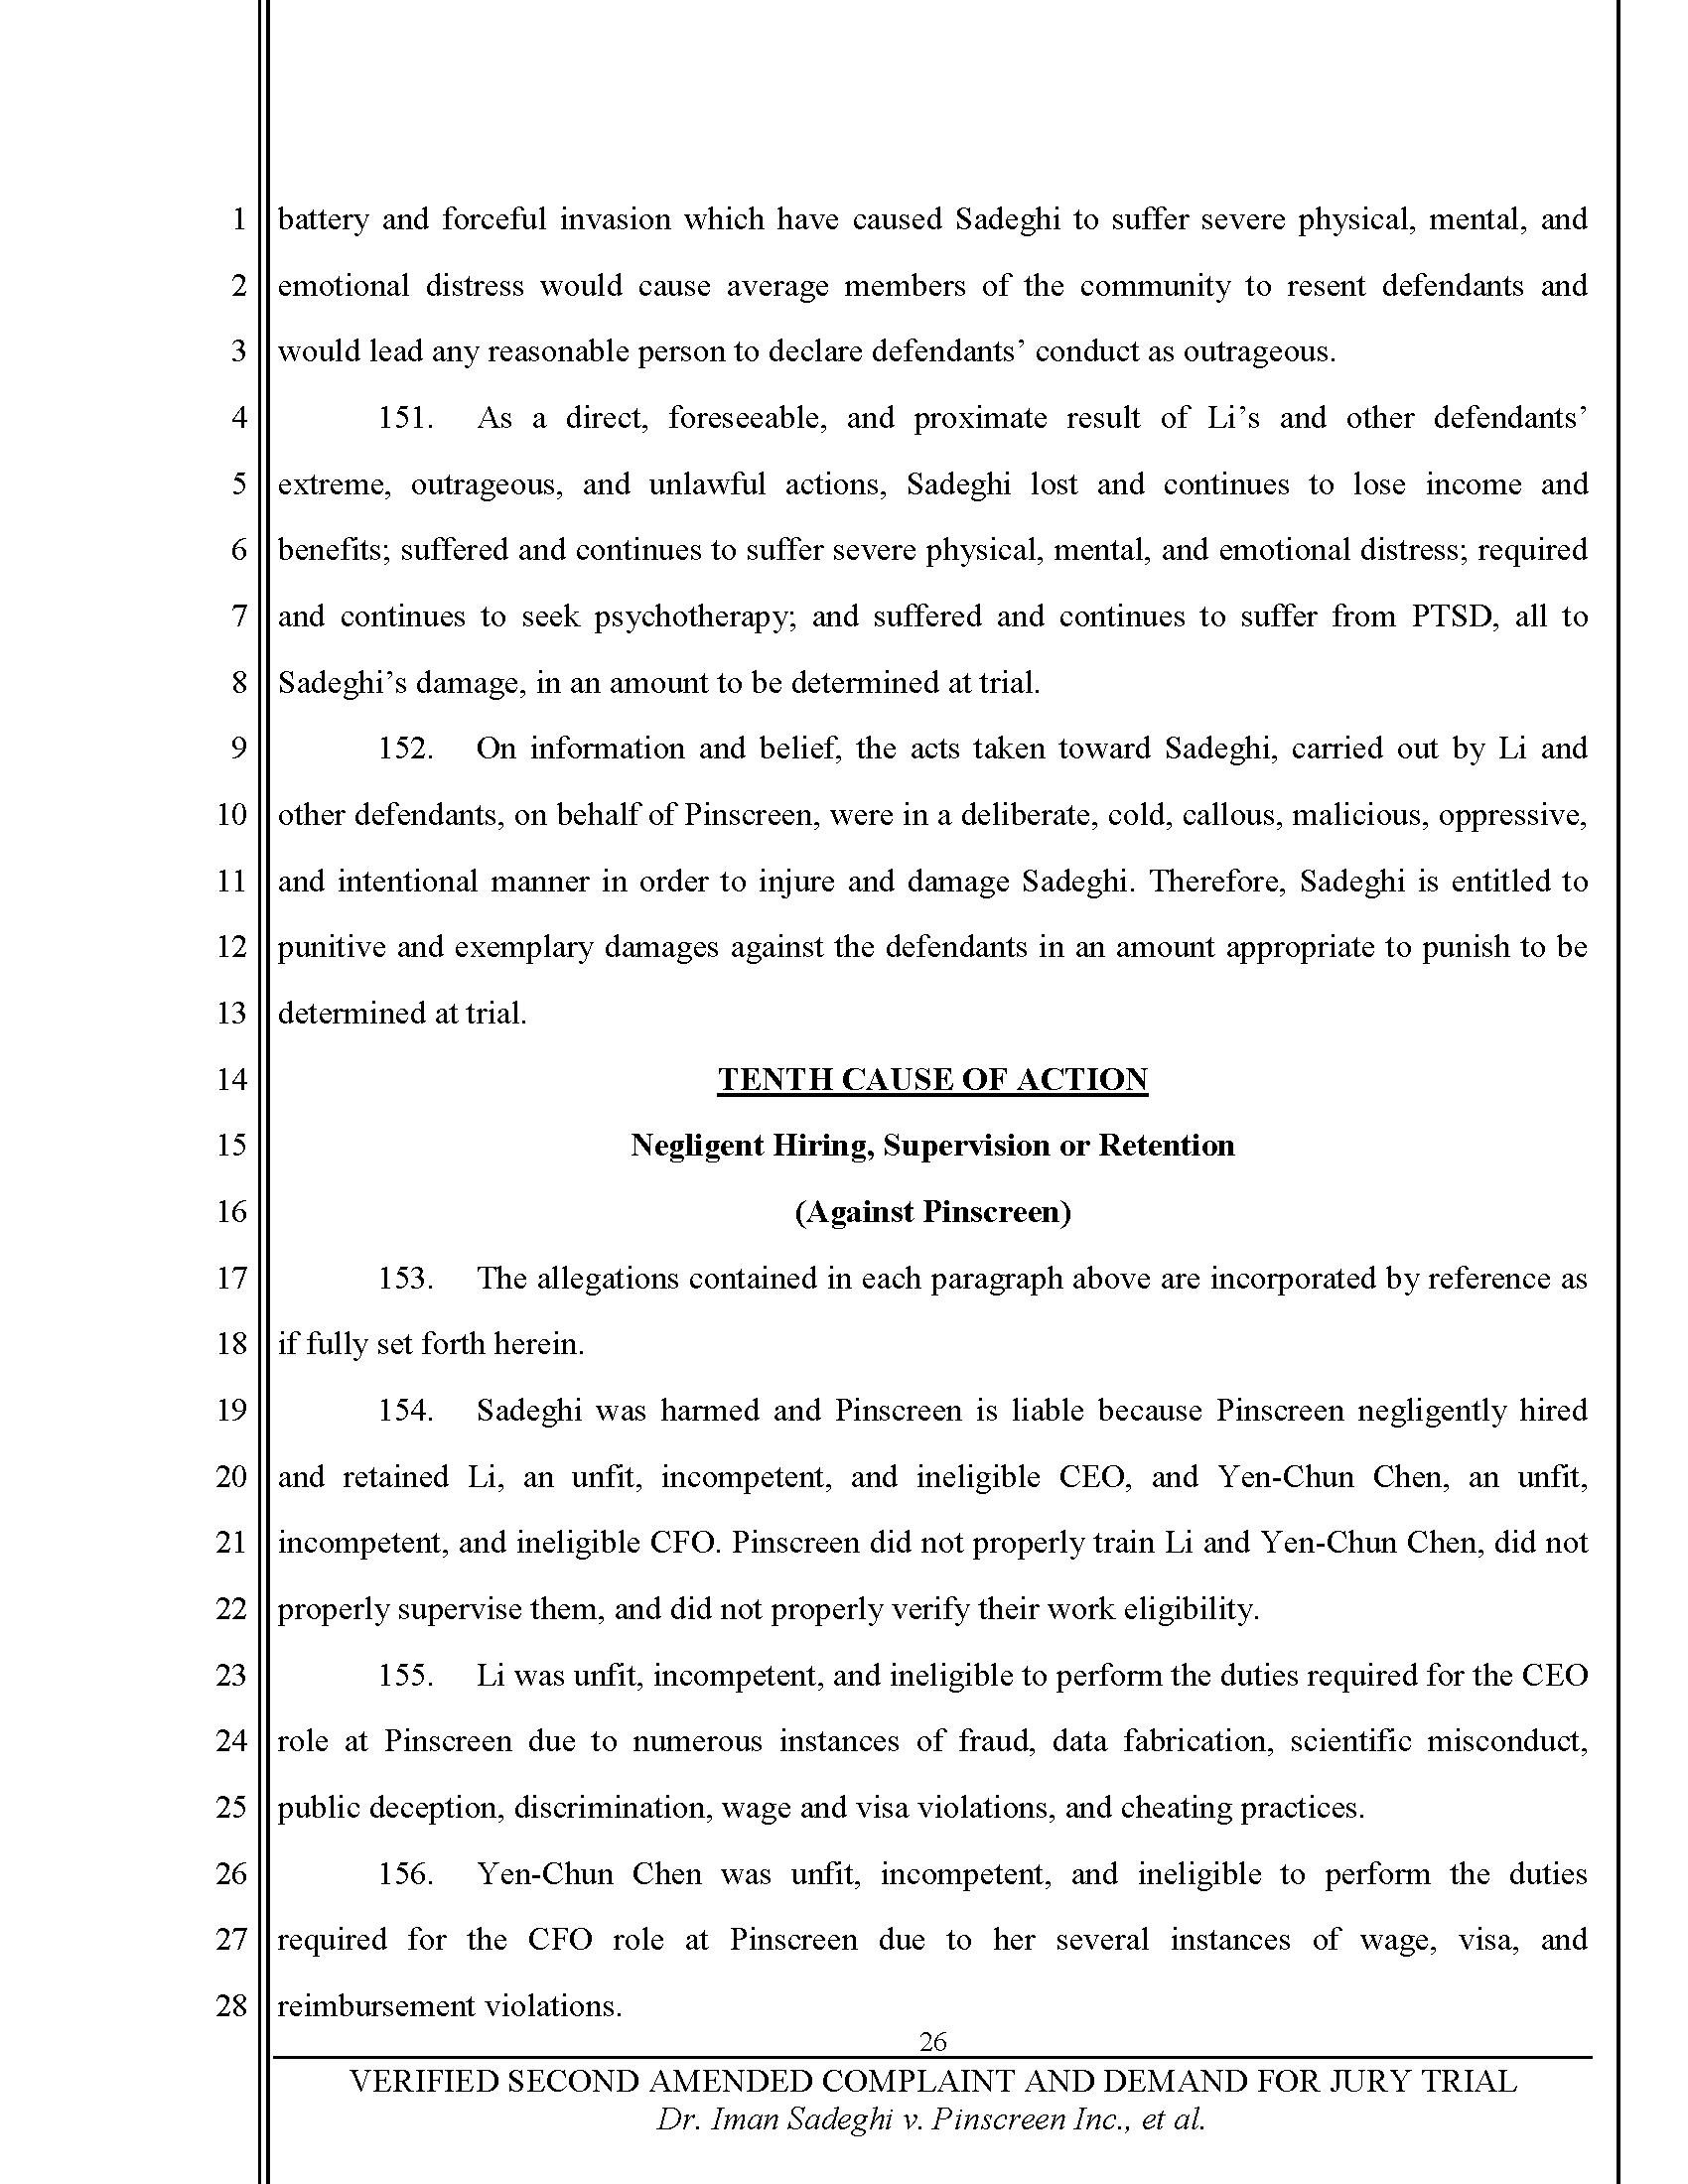 Second Amended Complaint (SAC) Page 27